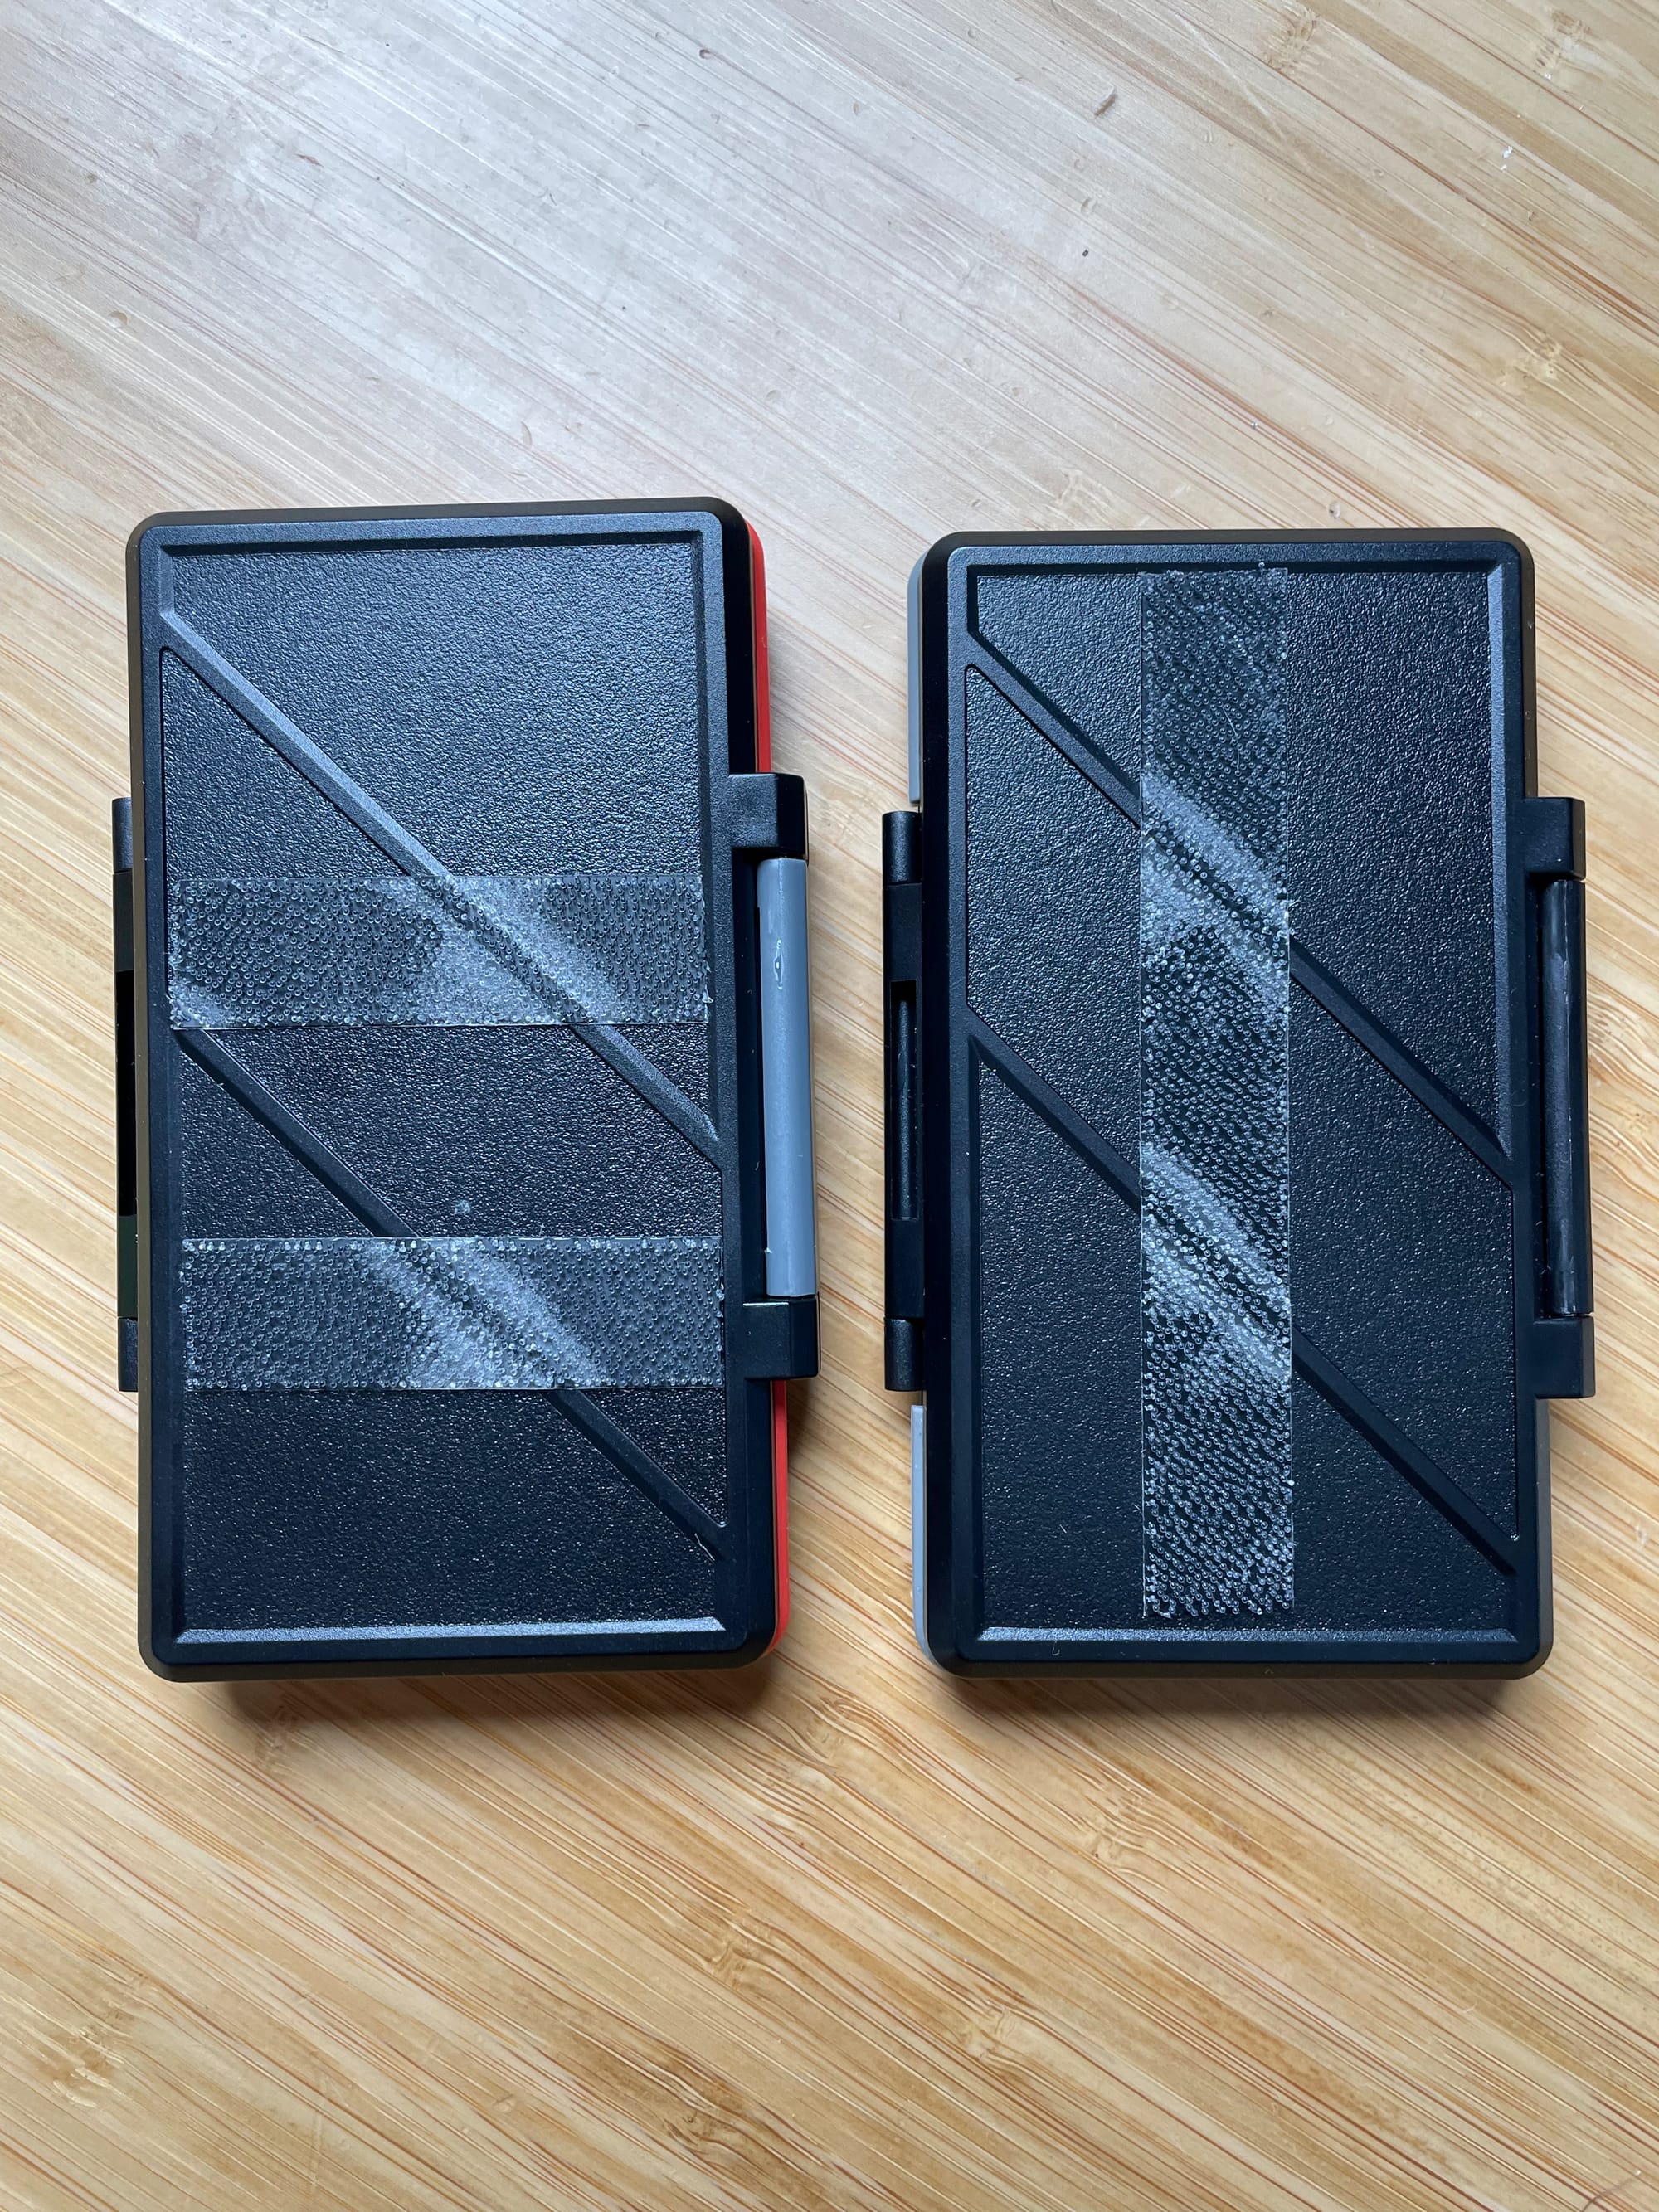 Here you can see the clear dual lock tape on the back of my SD card cases. This makes it really easy to keep them stuck together. 